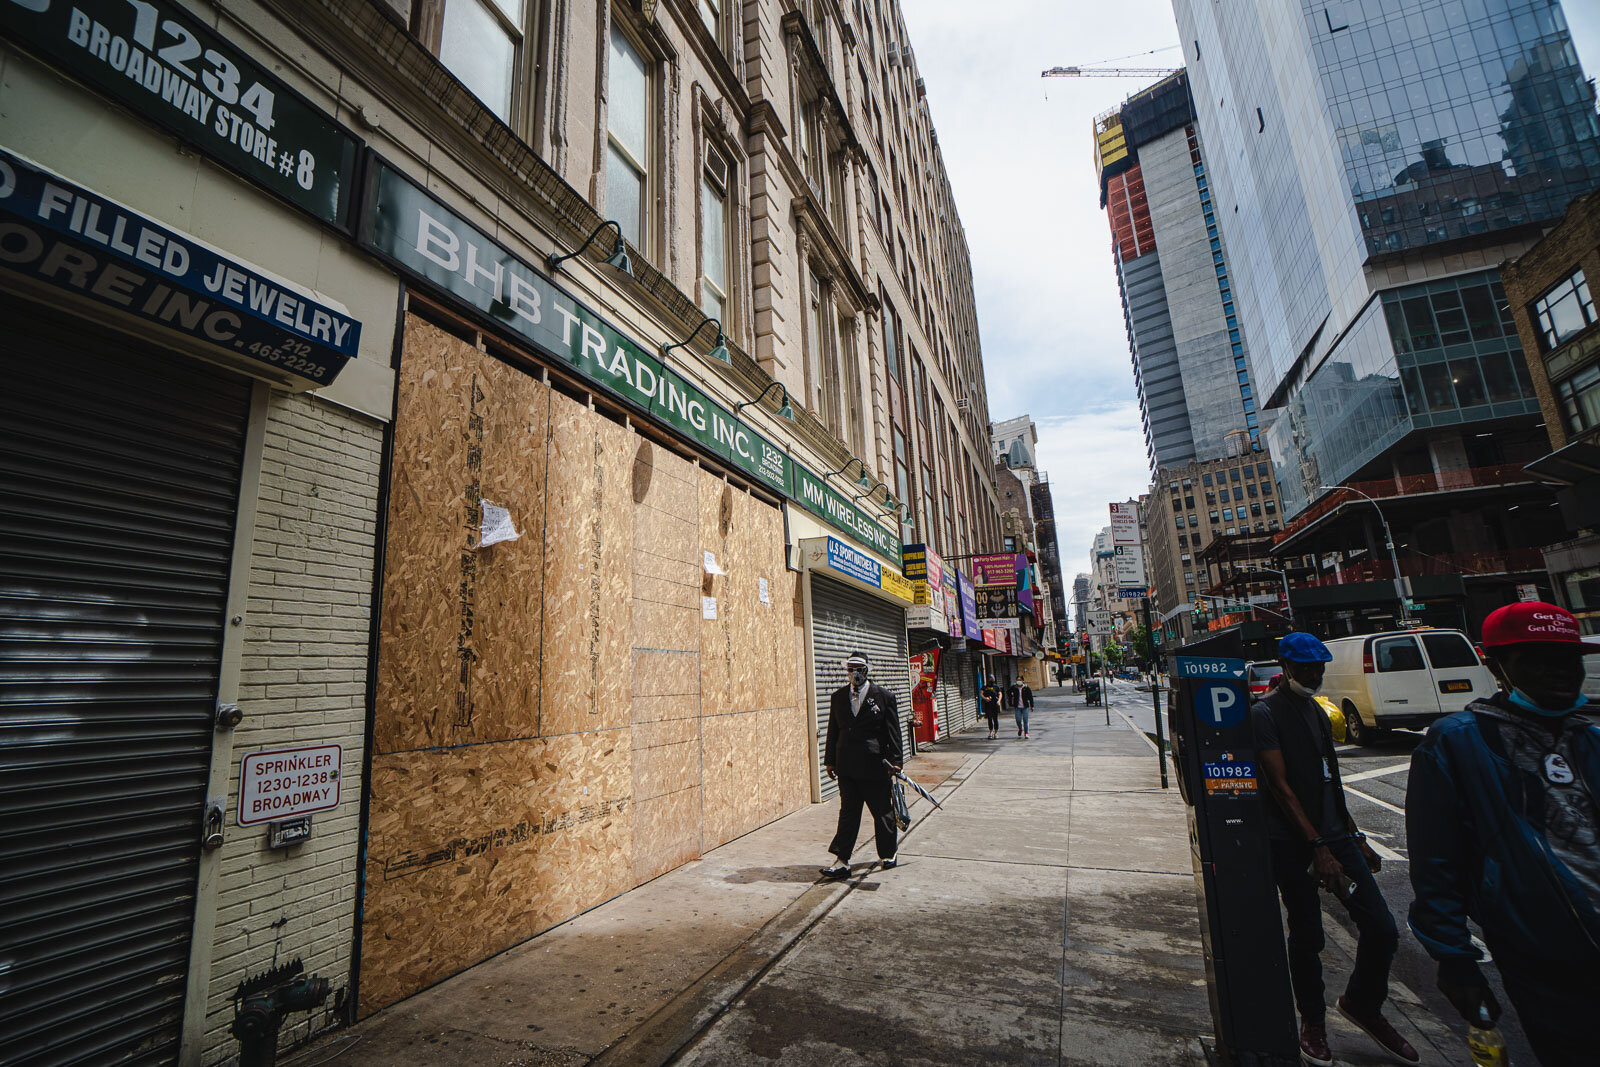  boarded up and closed stores on Broadway between 29th and 30th streets, midtown Manhattan NY photo by Stefano Giovannini 